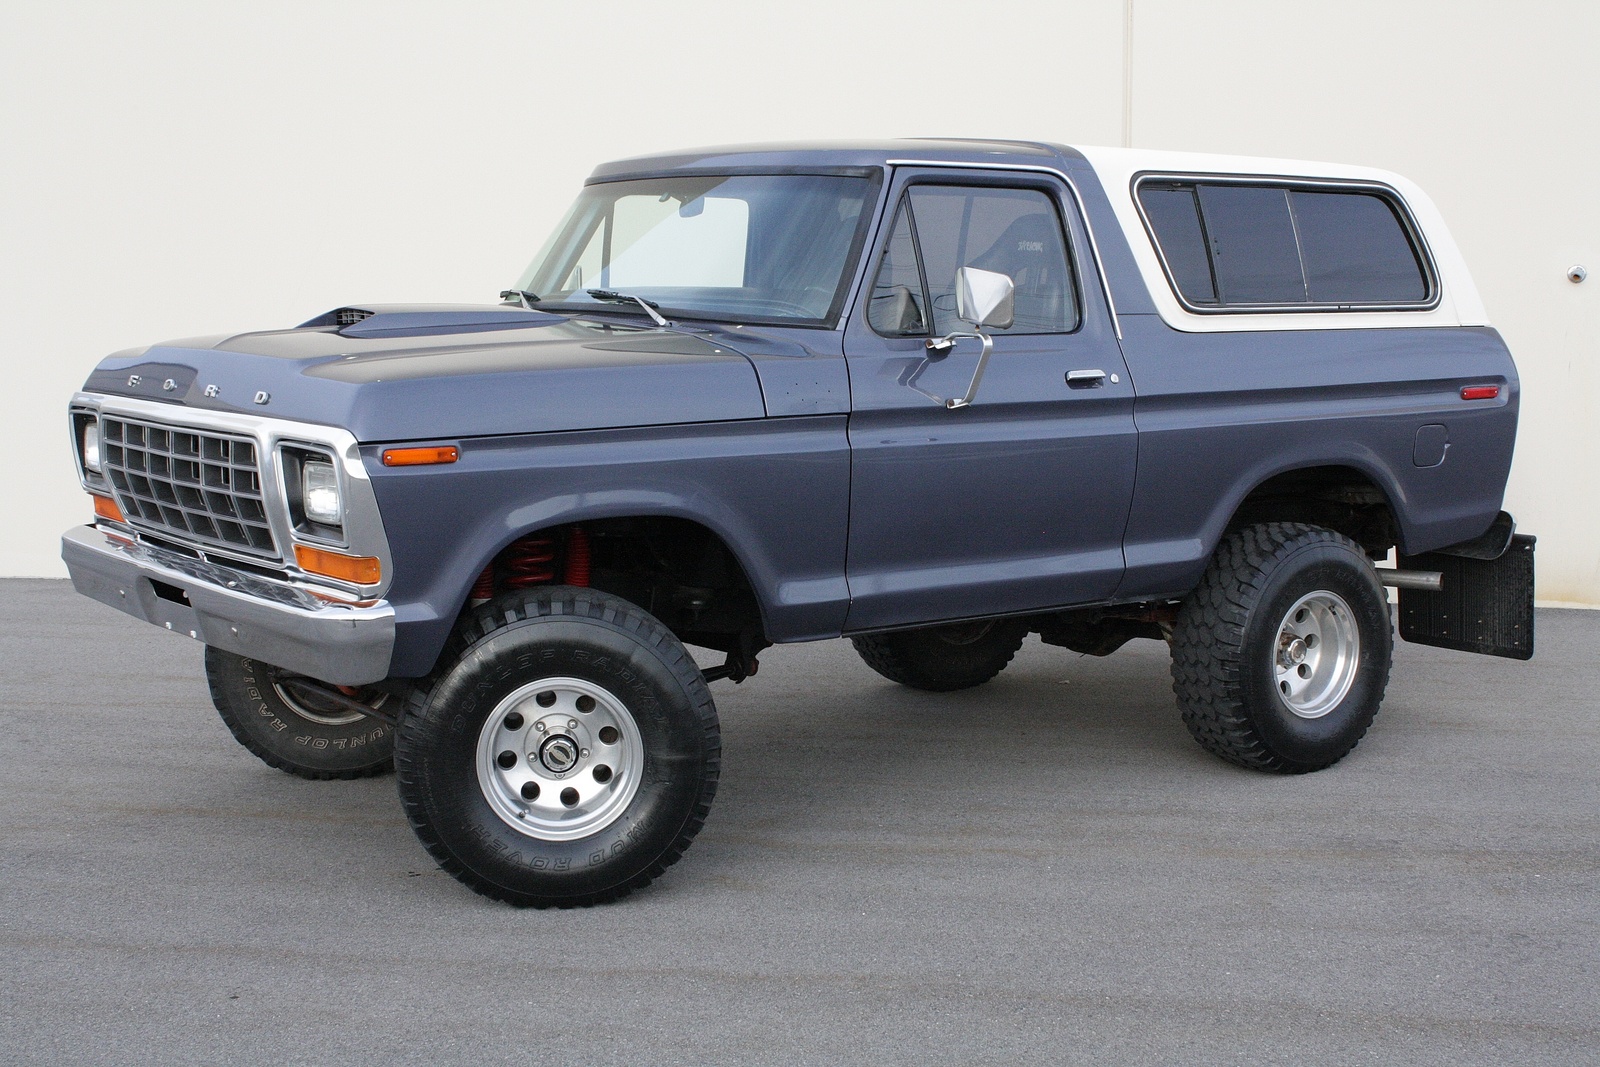 1996 Ford bronco review #2